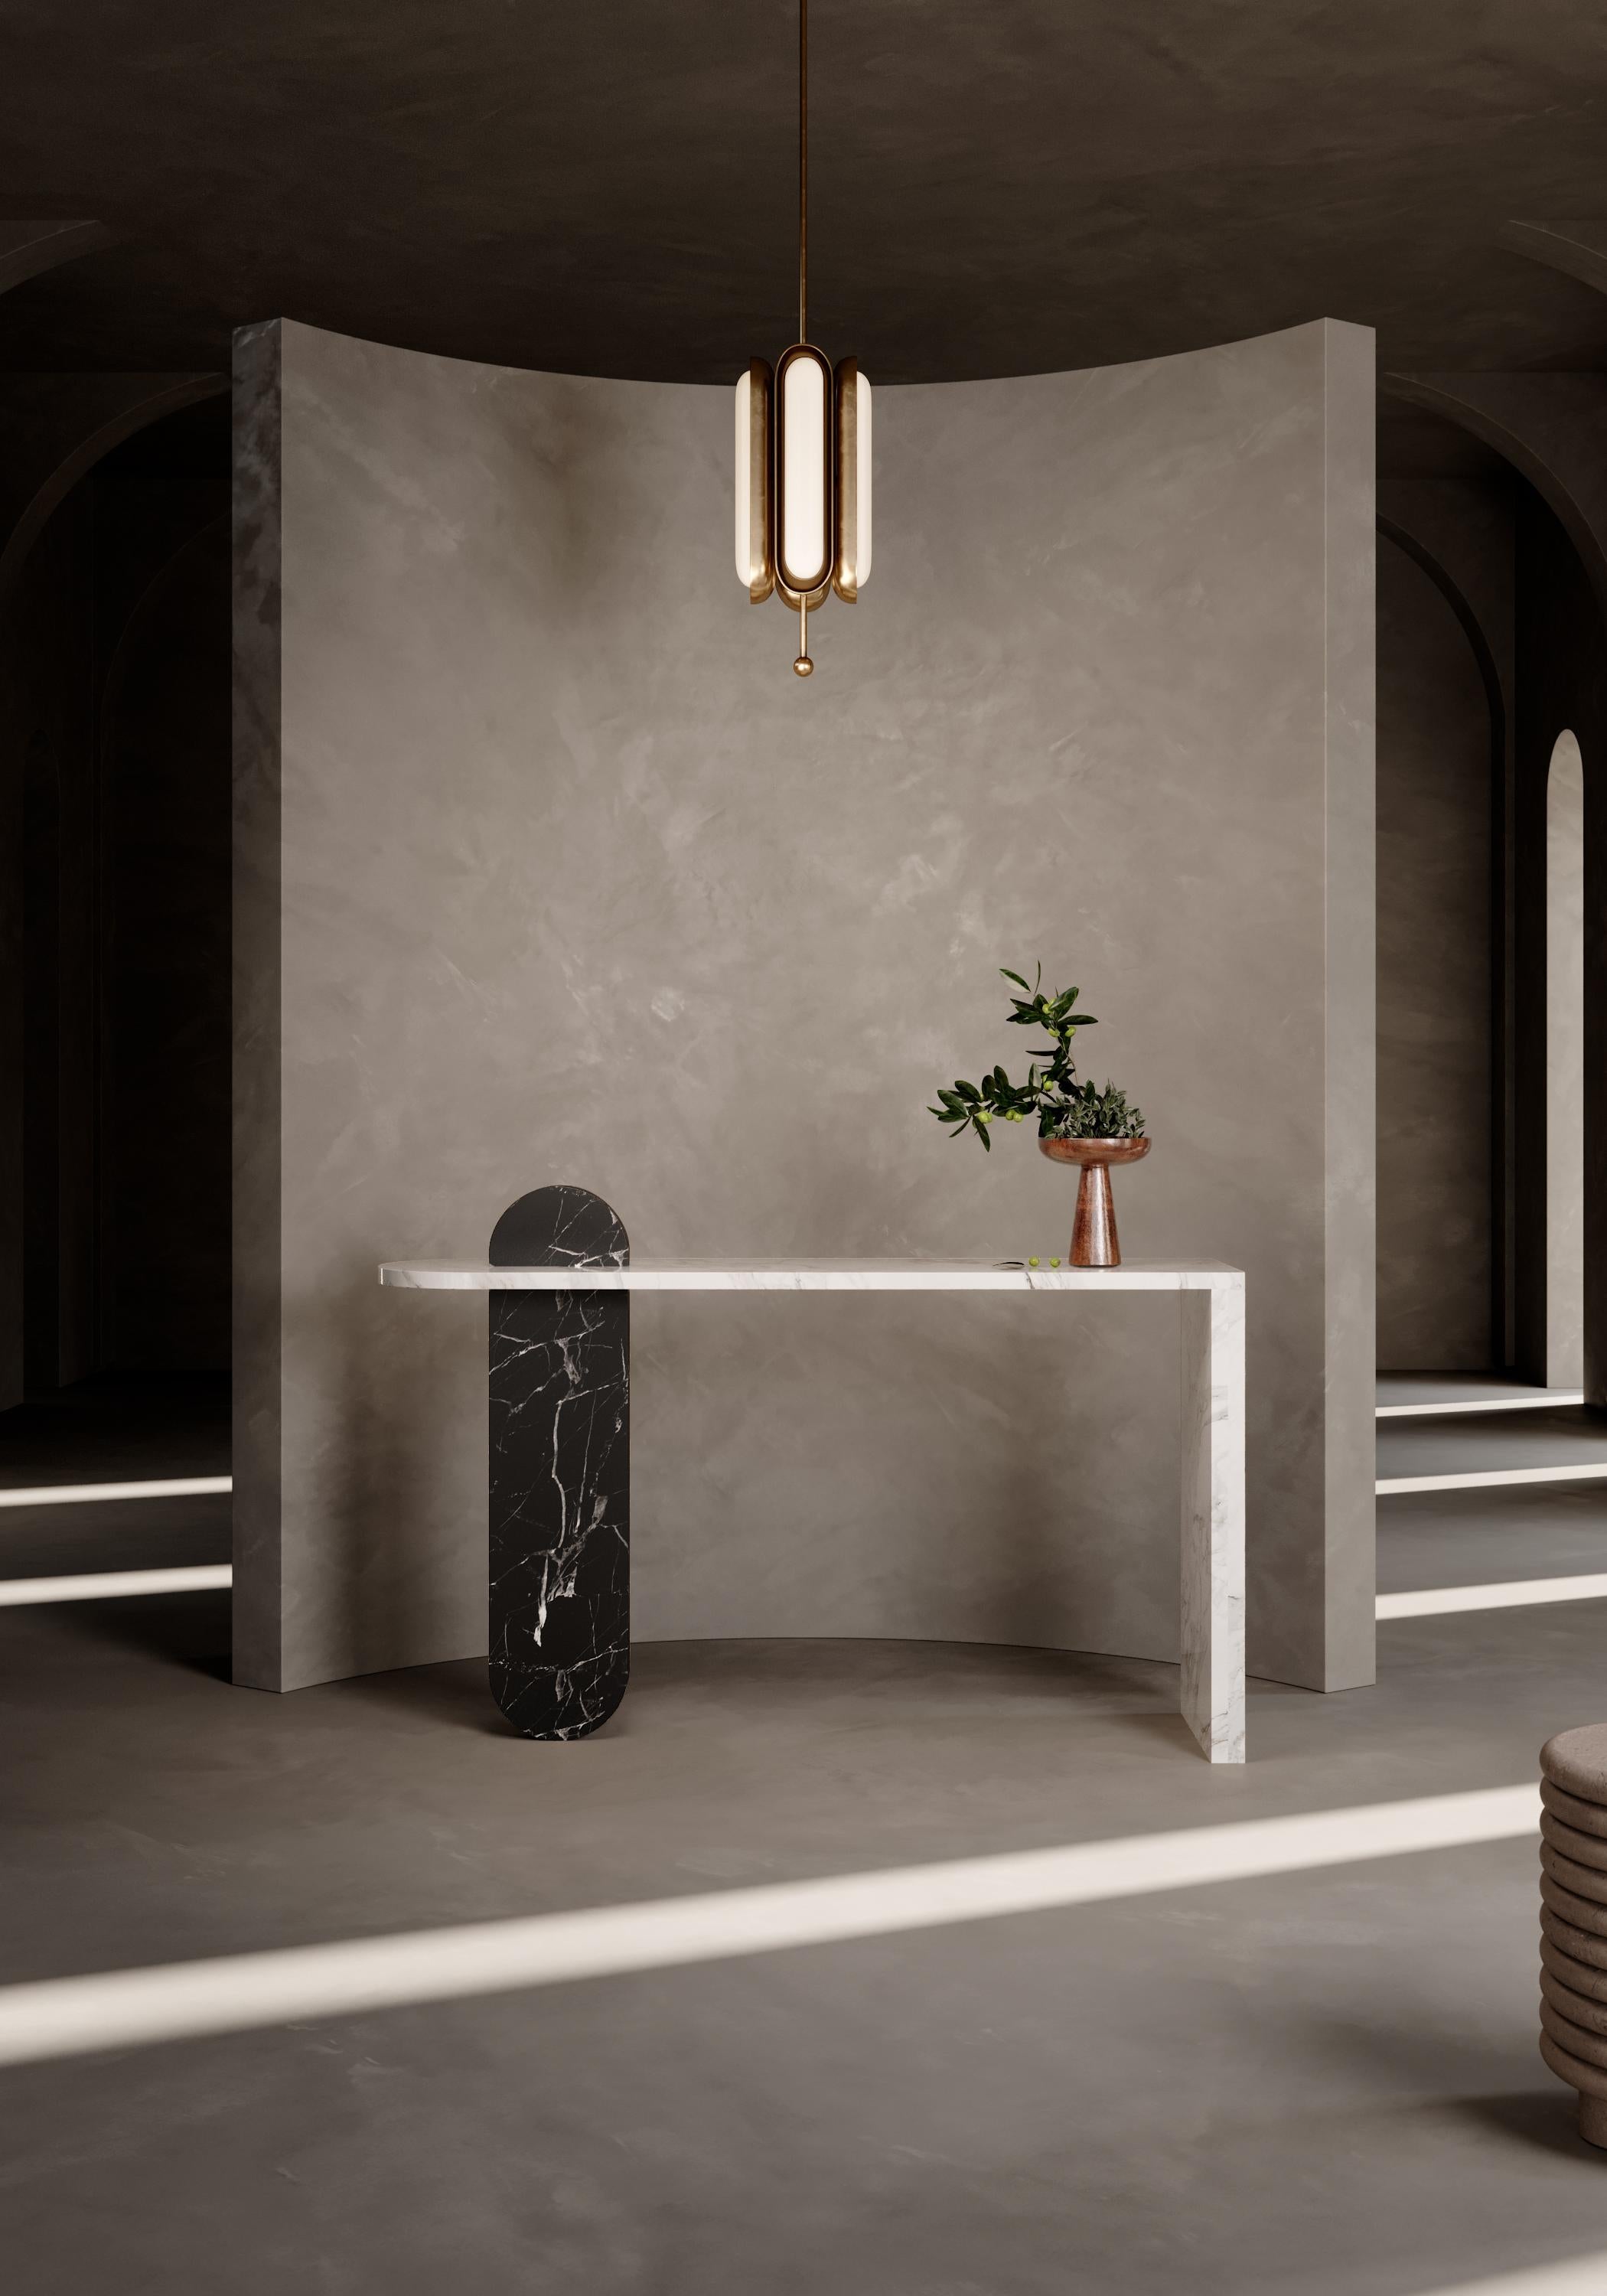 Simulating a sun rising, two marble pieces delicately interject, creating a visually enchanting marble tabletop filled with depth and character. Mixing natural textures and functional clean compositions create a feeling of harmonious celebration.